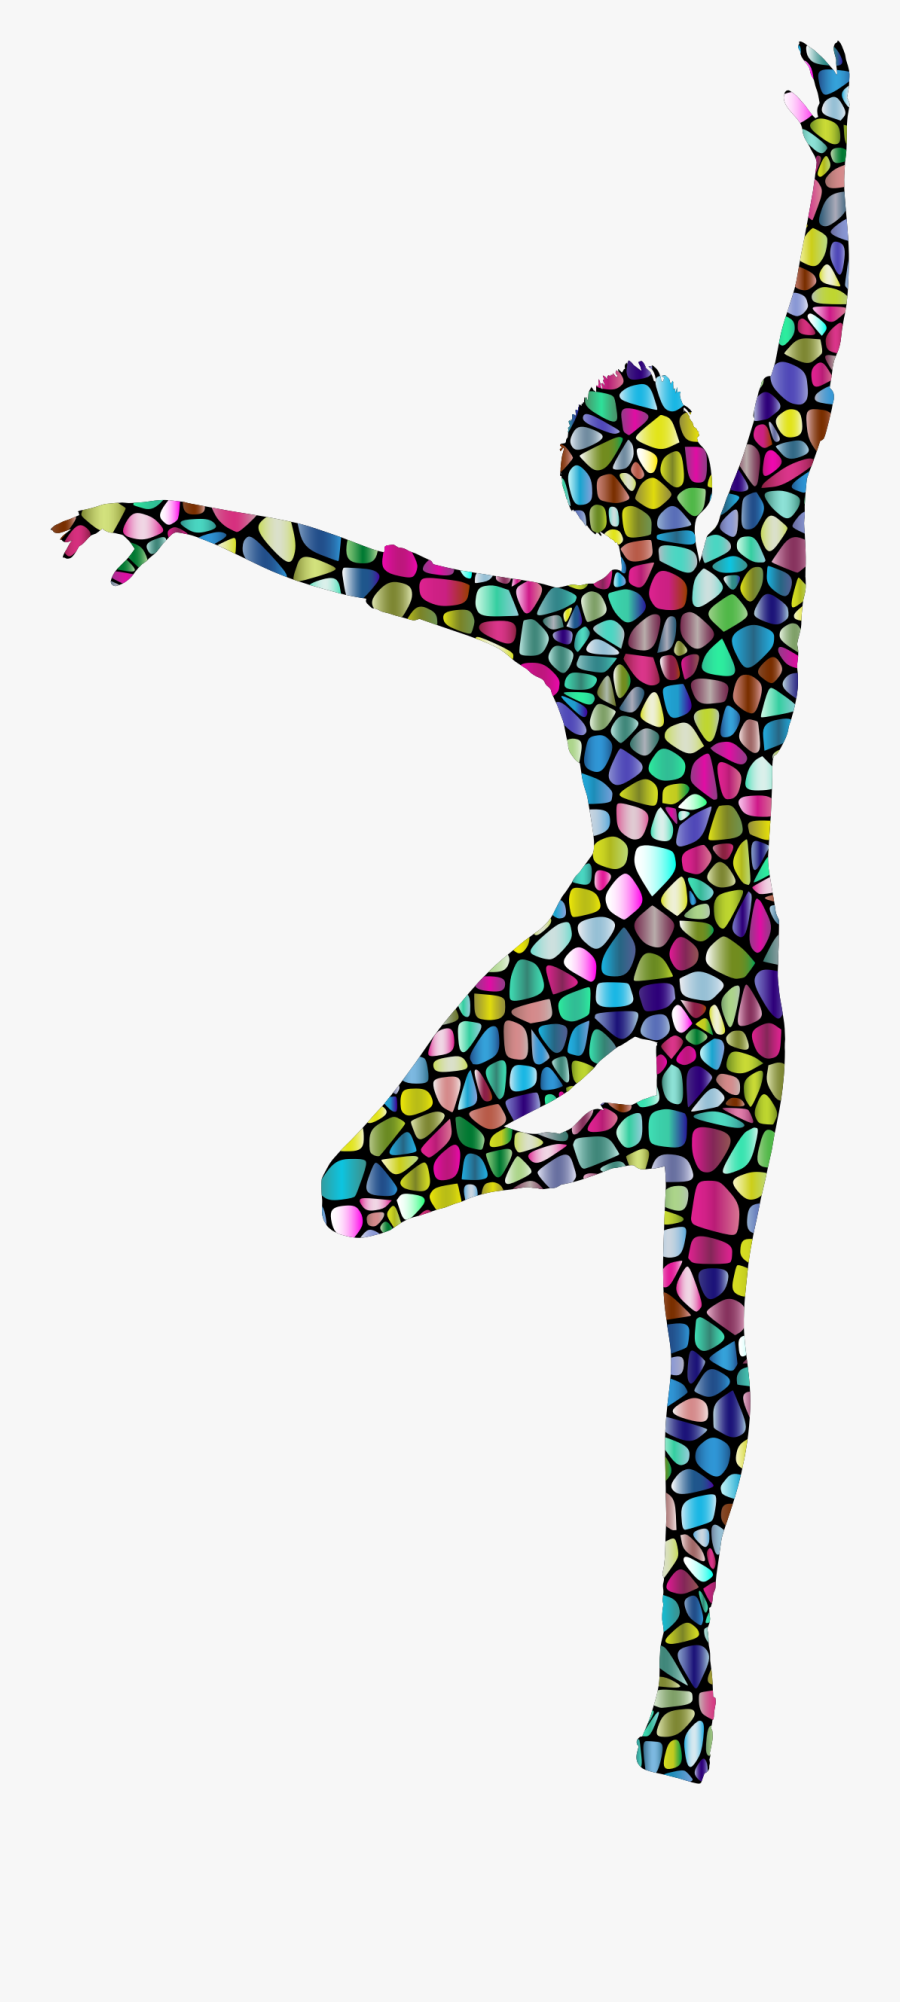 Polyprismatic Tiled Dancing Woman Silhouette With Background - Silhouette Transparent Background Dance Clip Art, Transparent Clipart